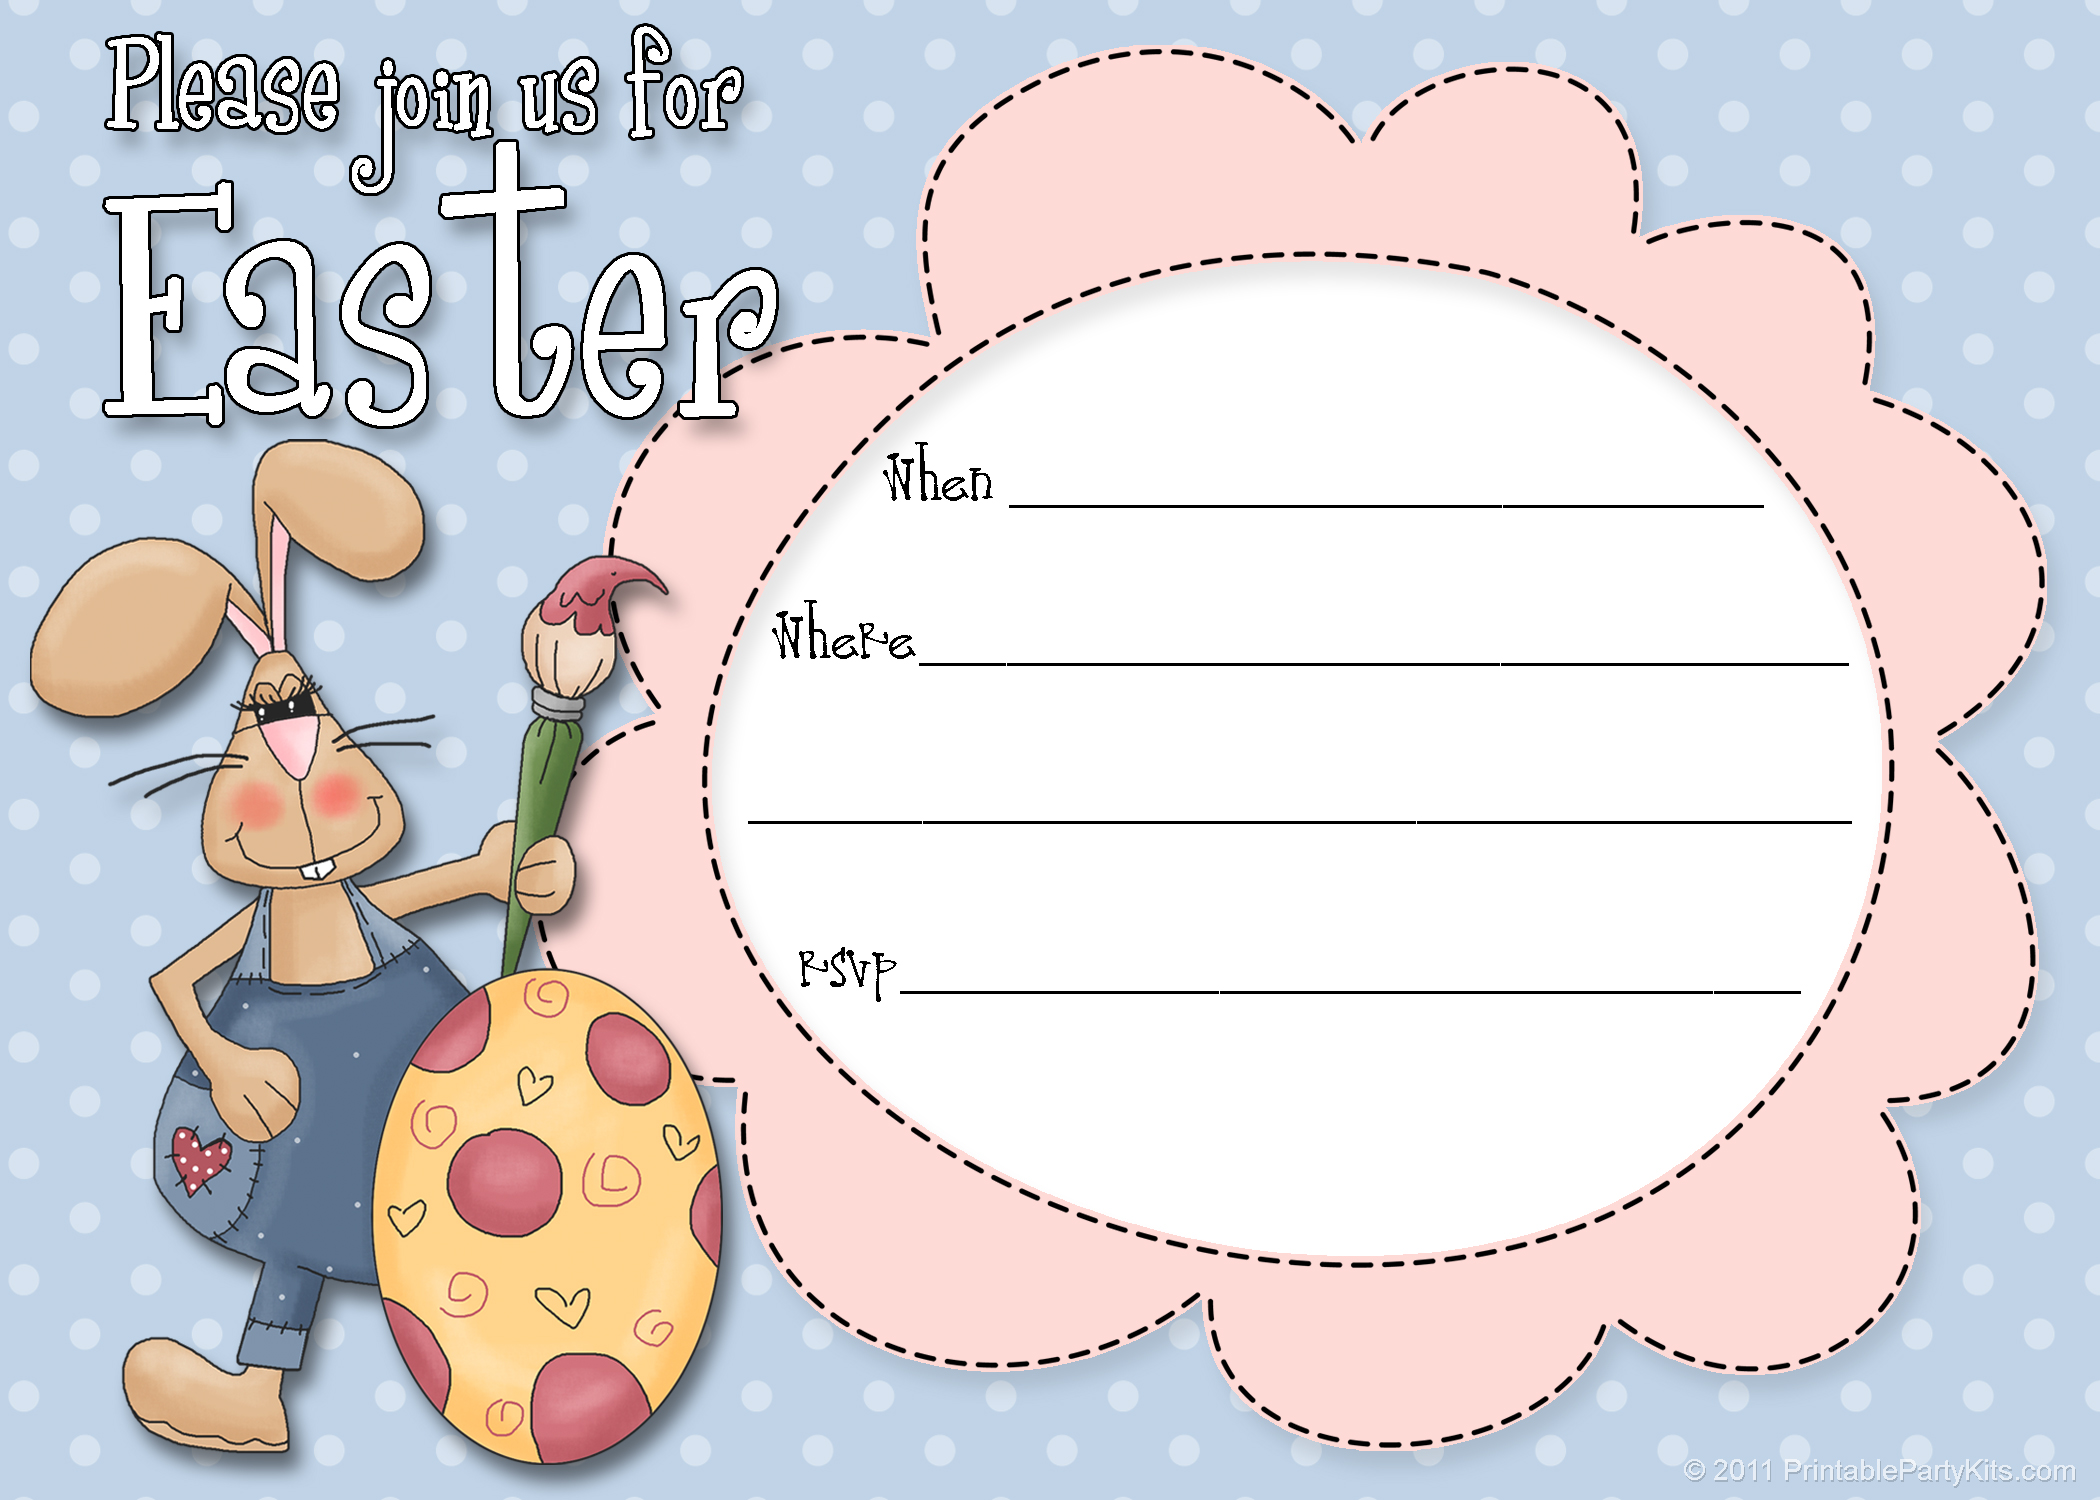 free-easter-party-invitations-template-printable-party-kits